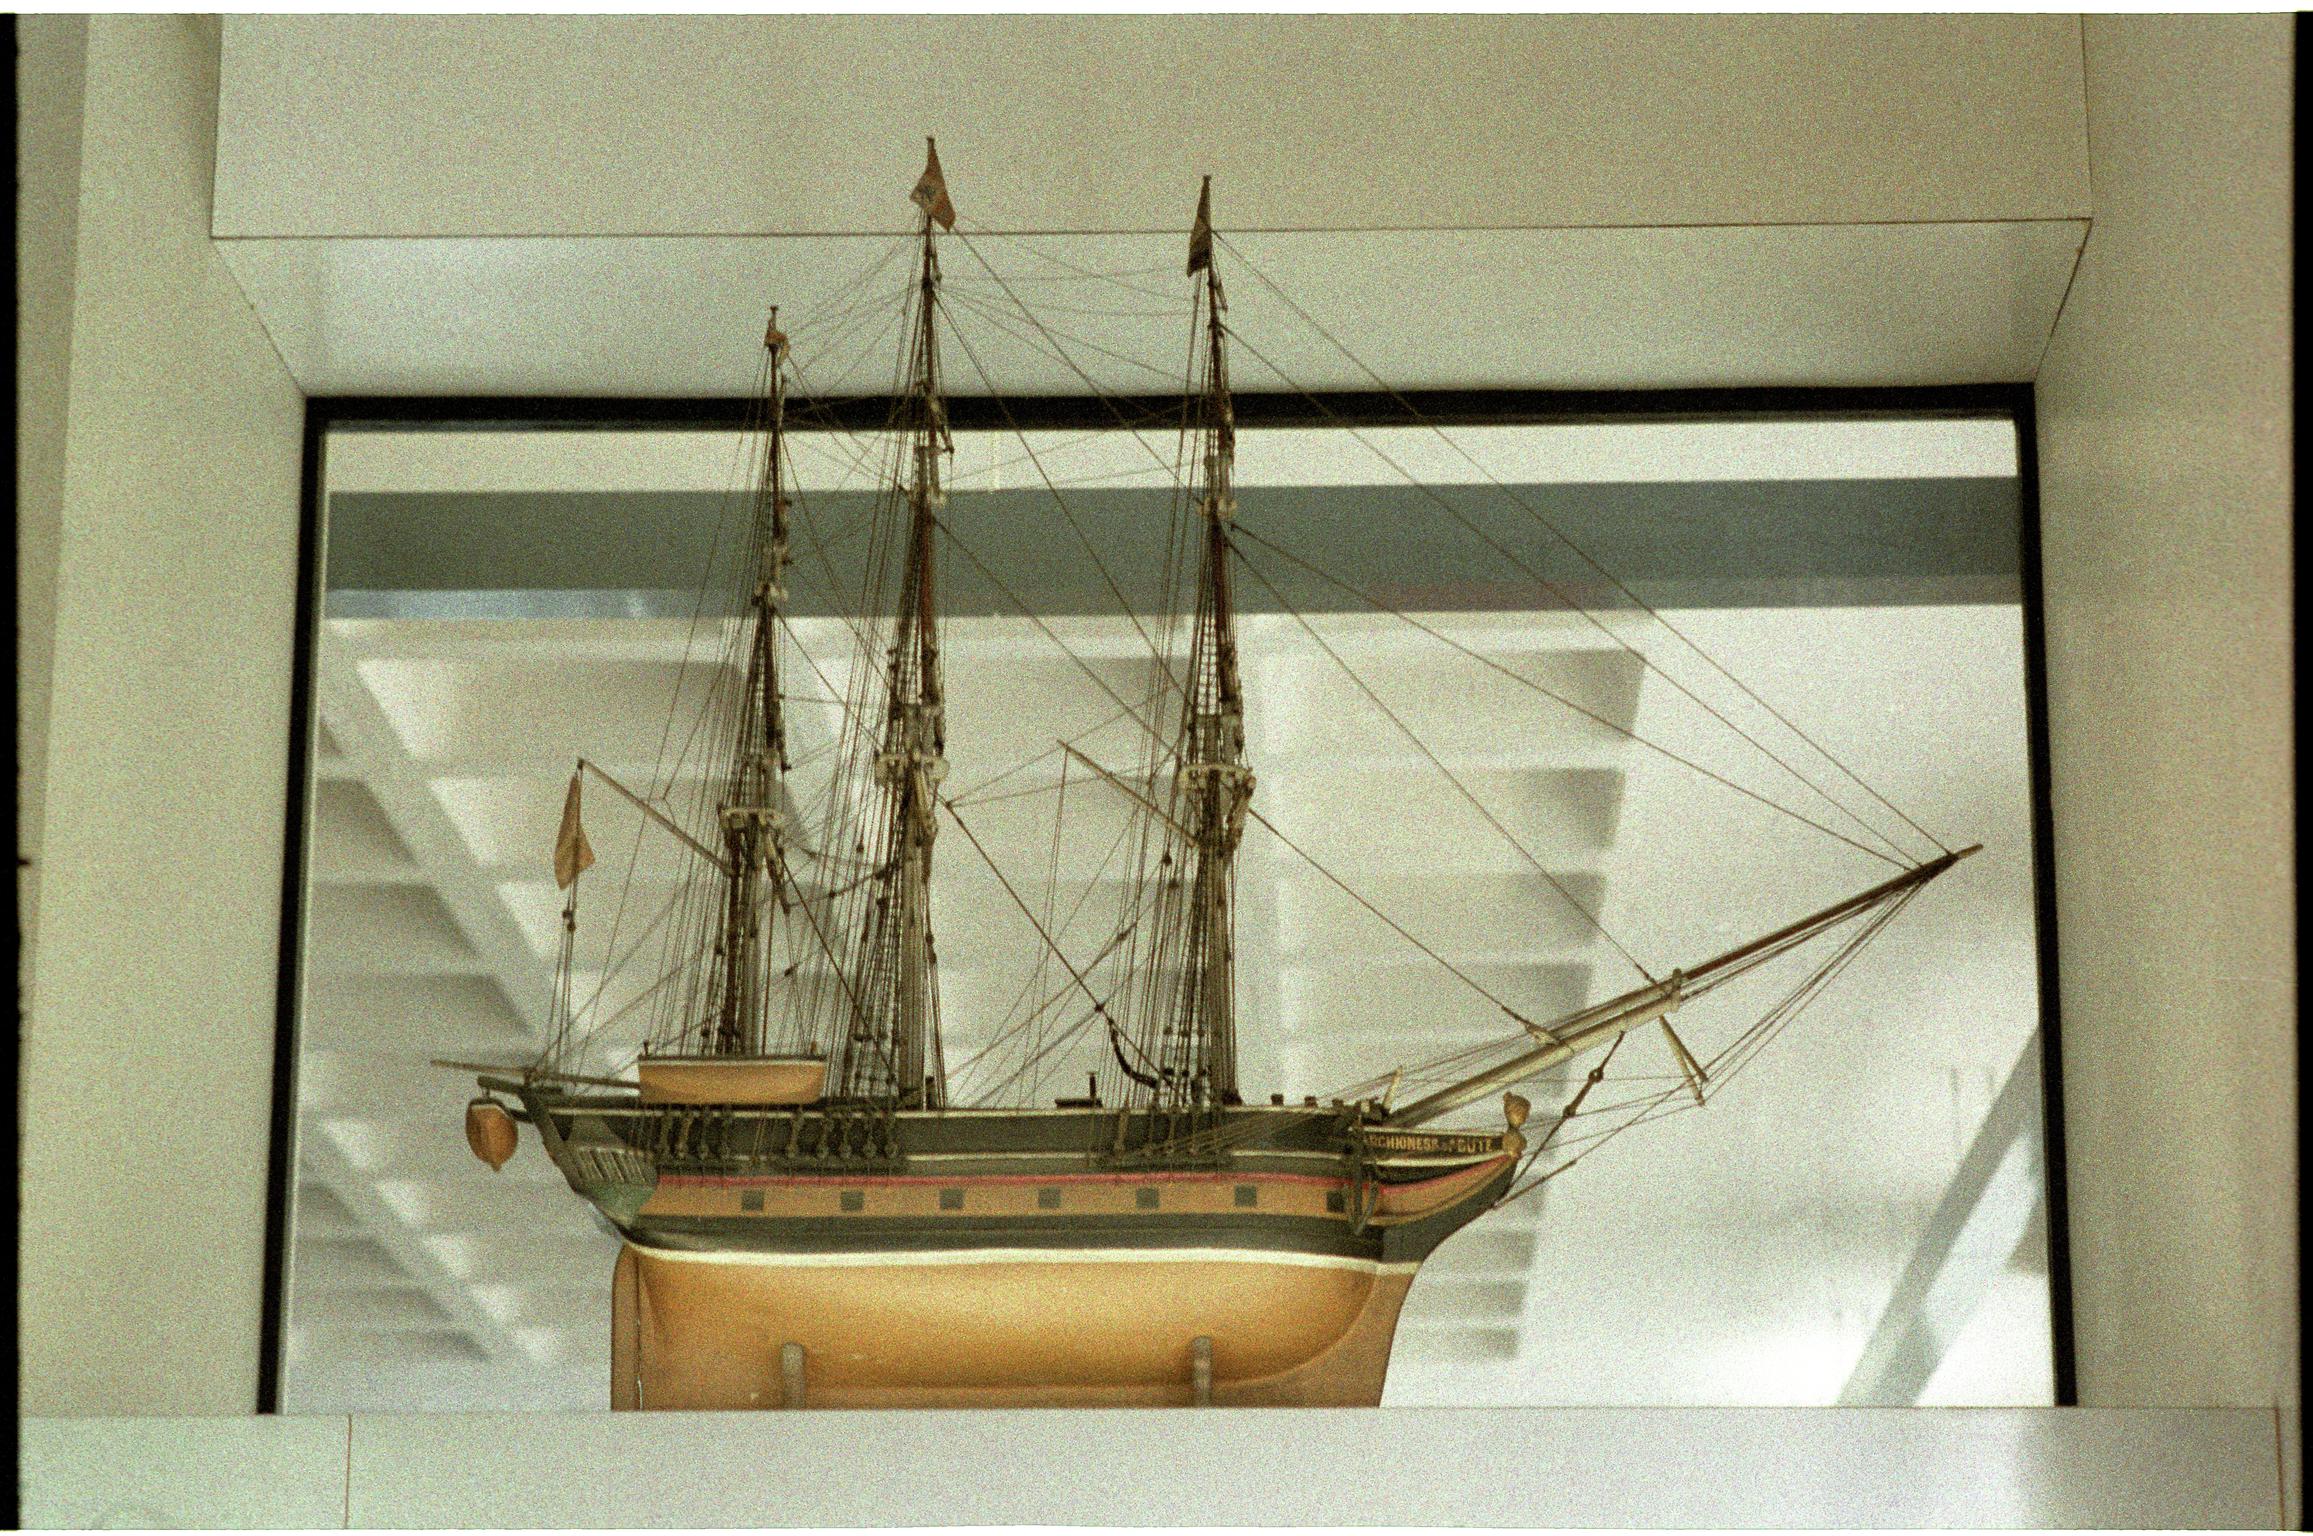 MARCHIONESS OF BUTE, full hull ship model